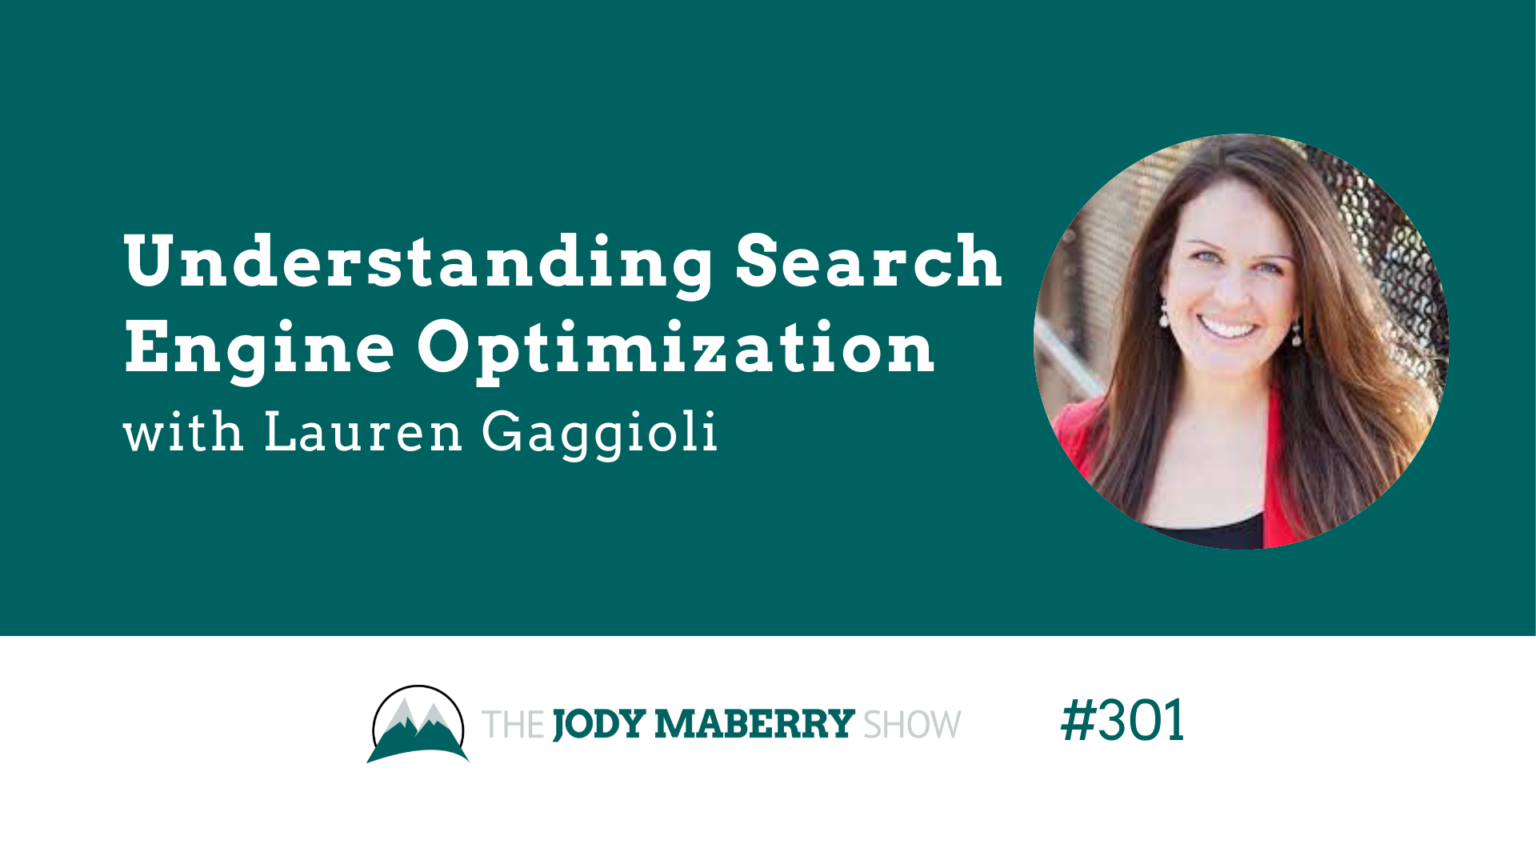 Jody Maberry Show Episode 301 Understanding Search Engine Optimization